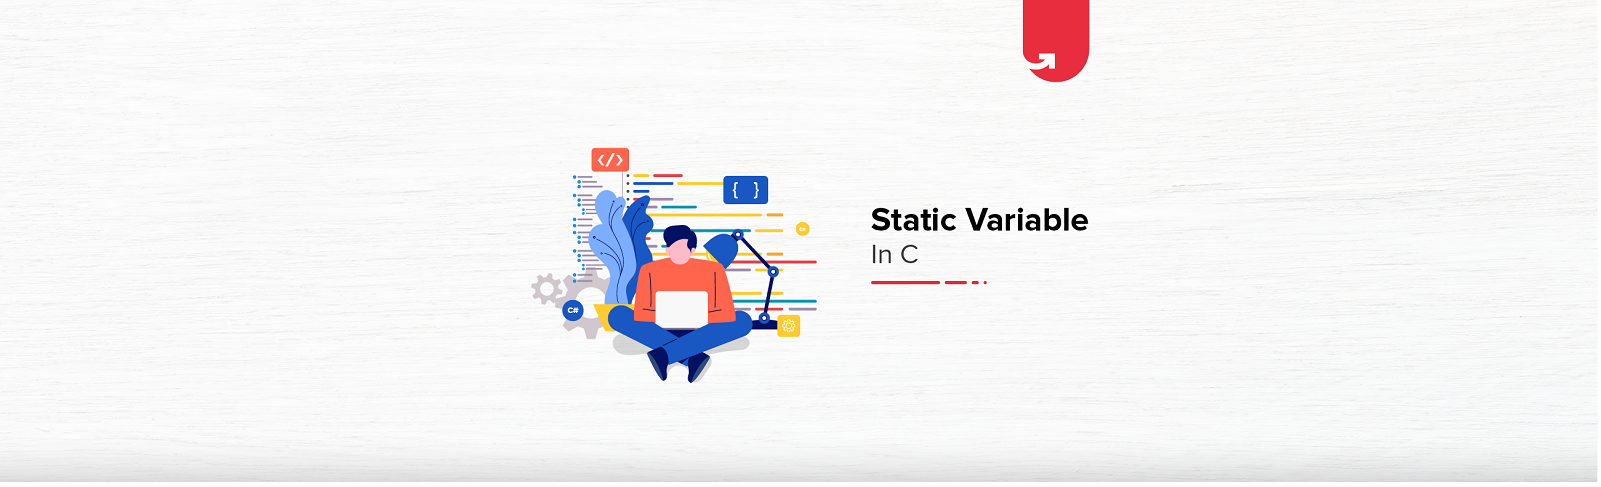 Learn About Static Variable in C [With Coding Example] | upGrad blog